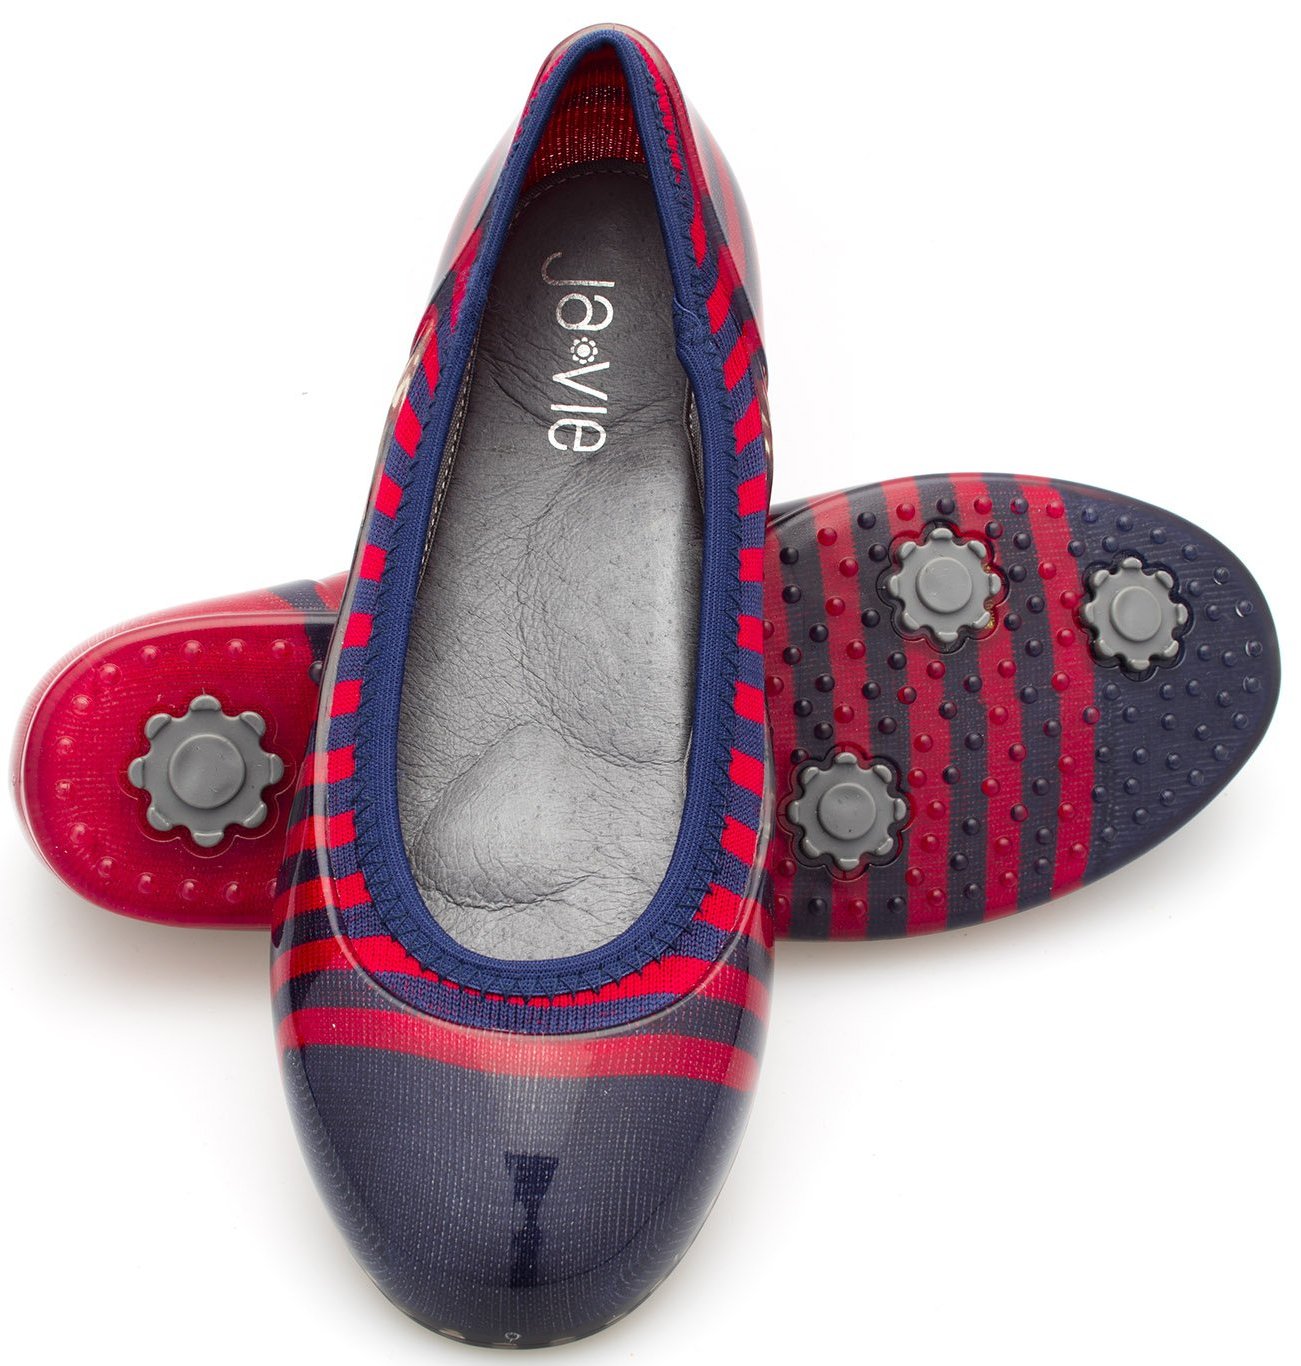 ja-vie navy/red rugby stripe jelly flats shoes